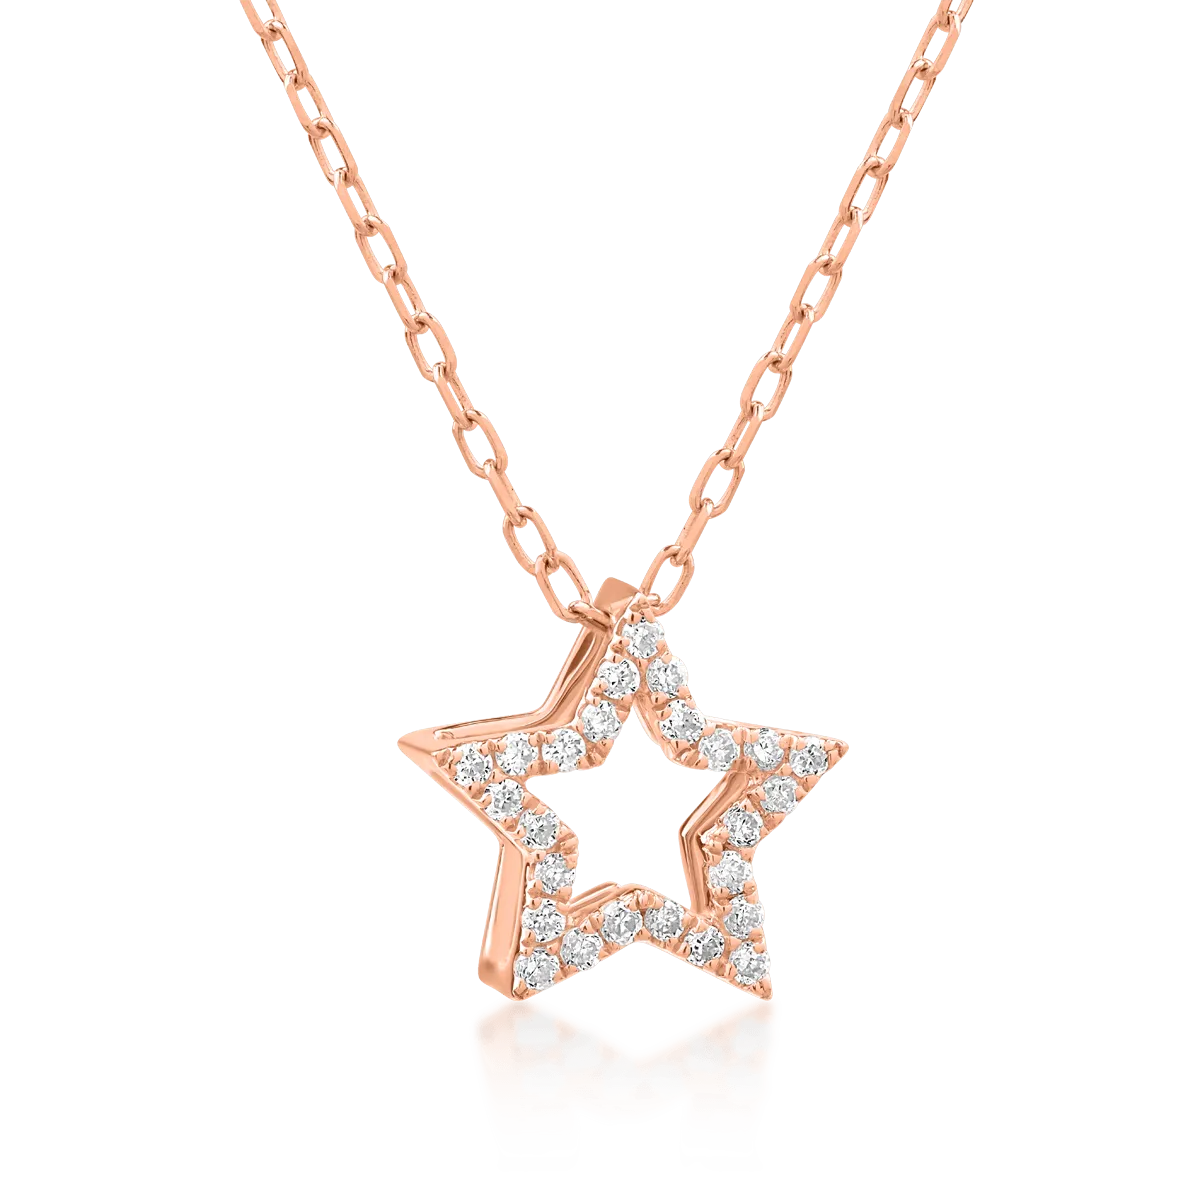 18K rose gold star pendant necklace with 0.59ct diamonds